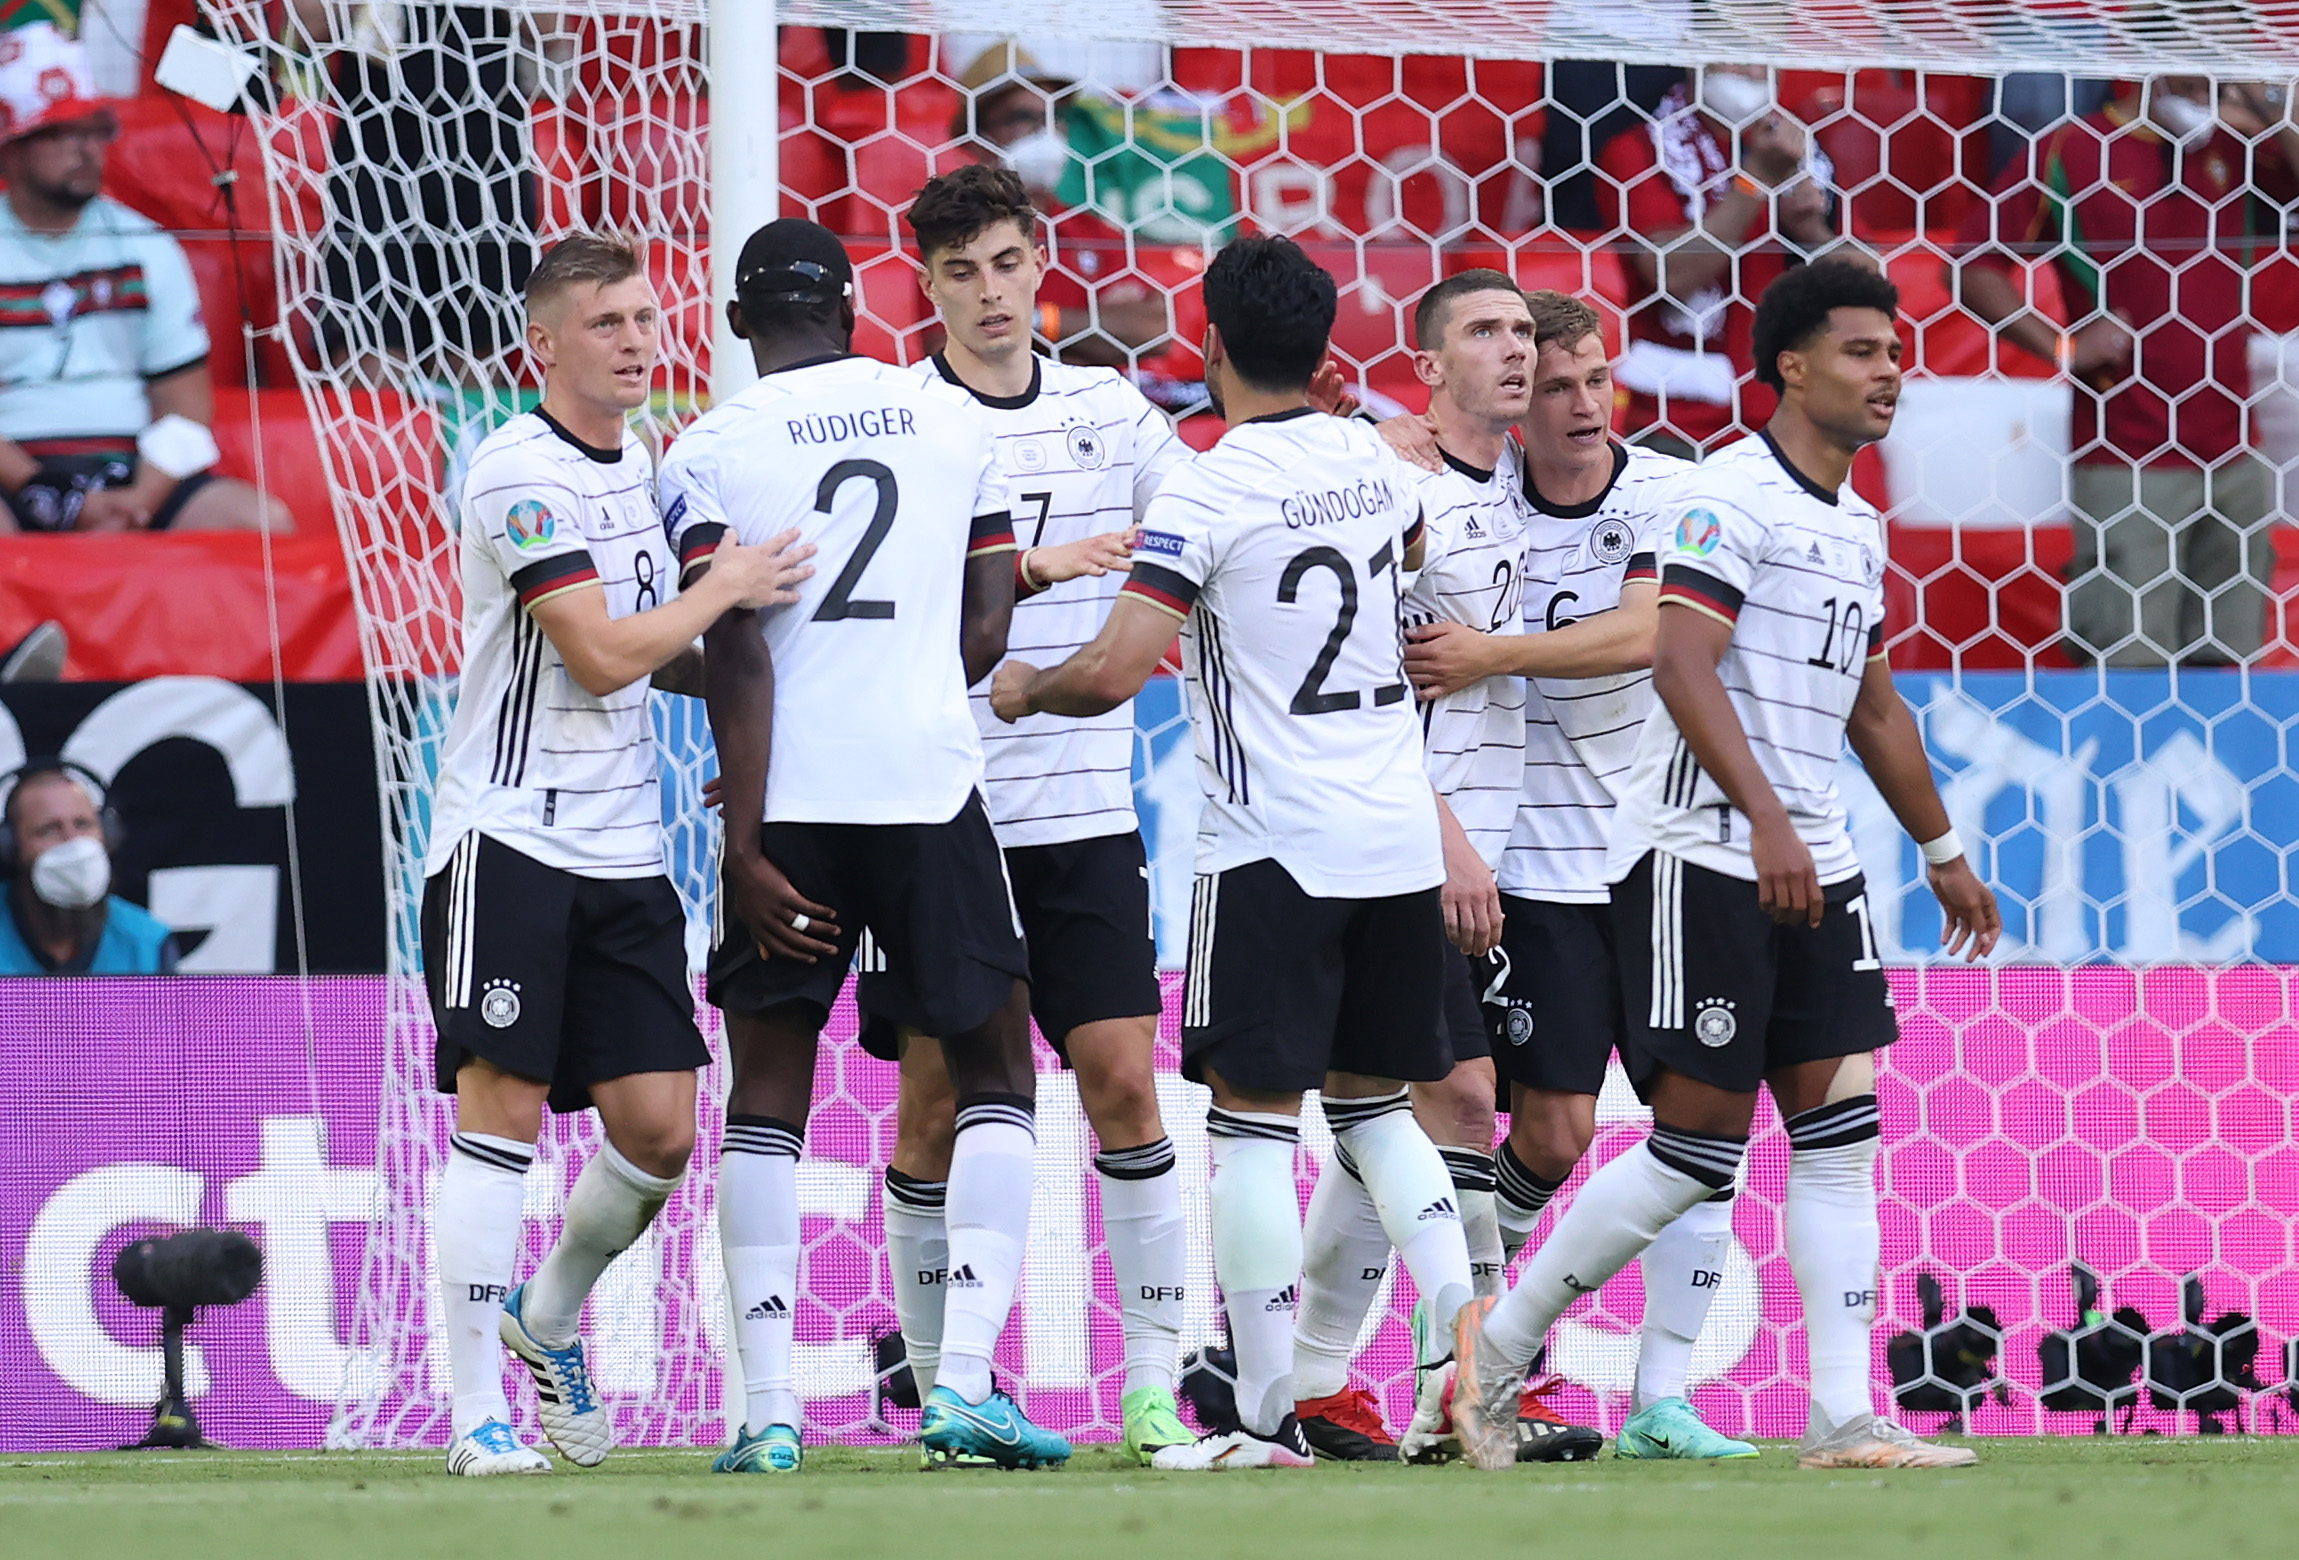 To write off Germany after round of 16 qualification would be crazy, proclaims Jurgen Klopp